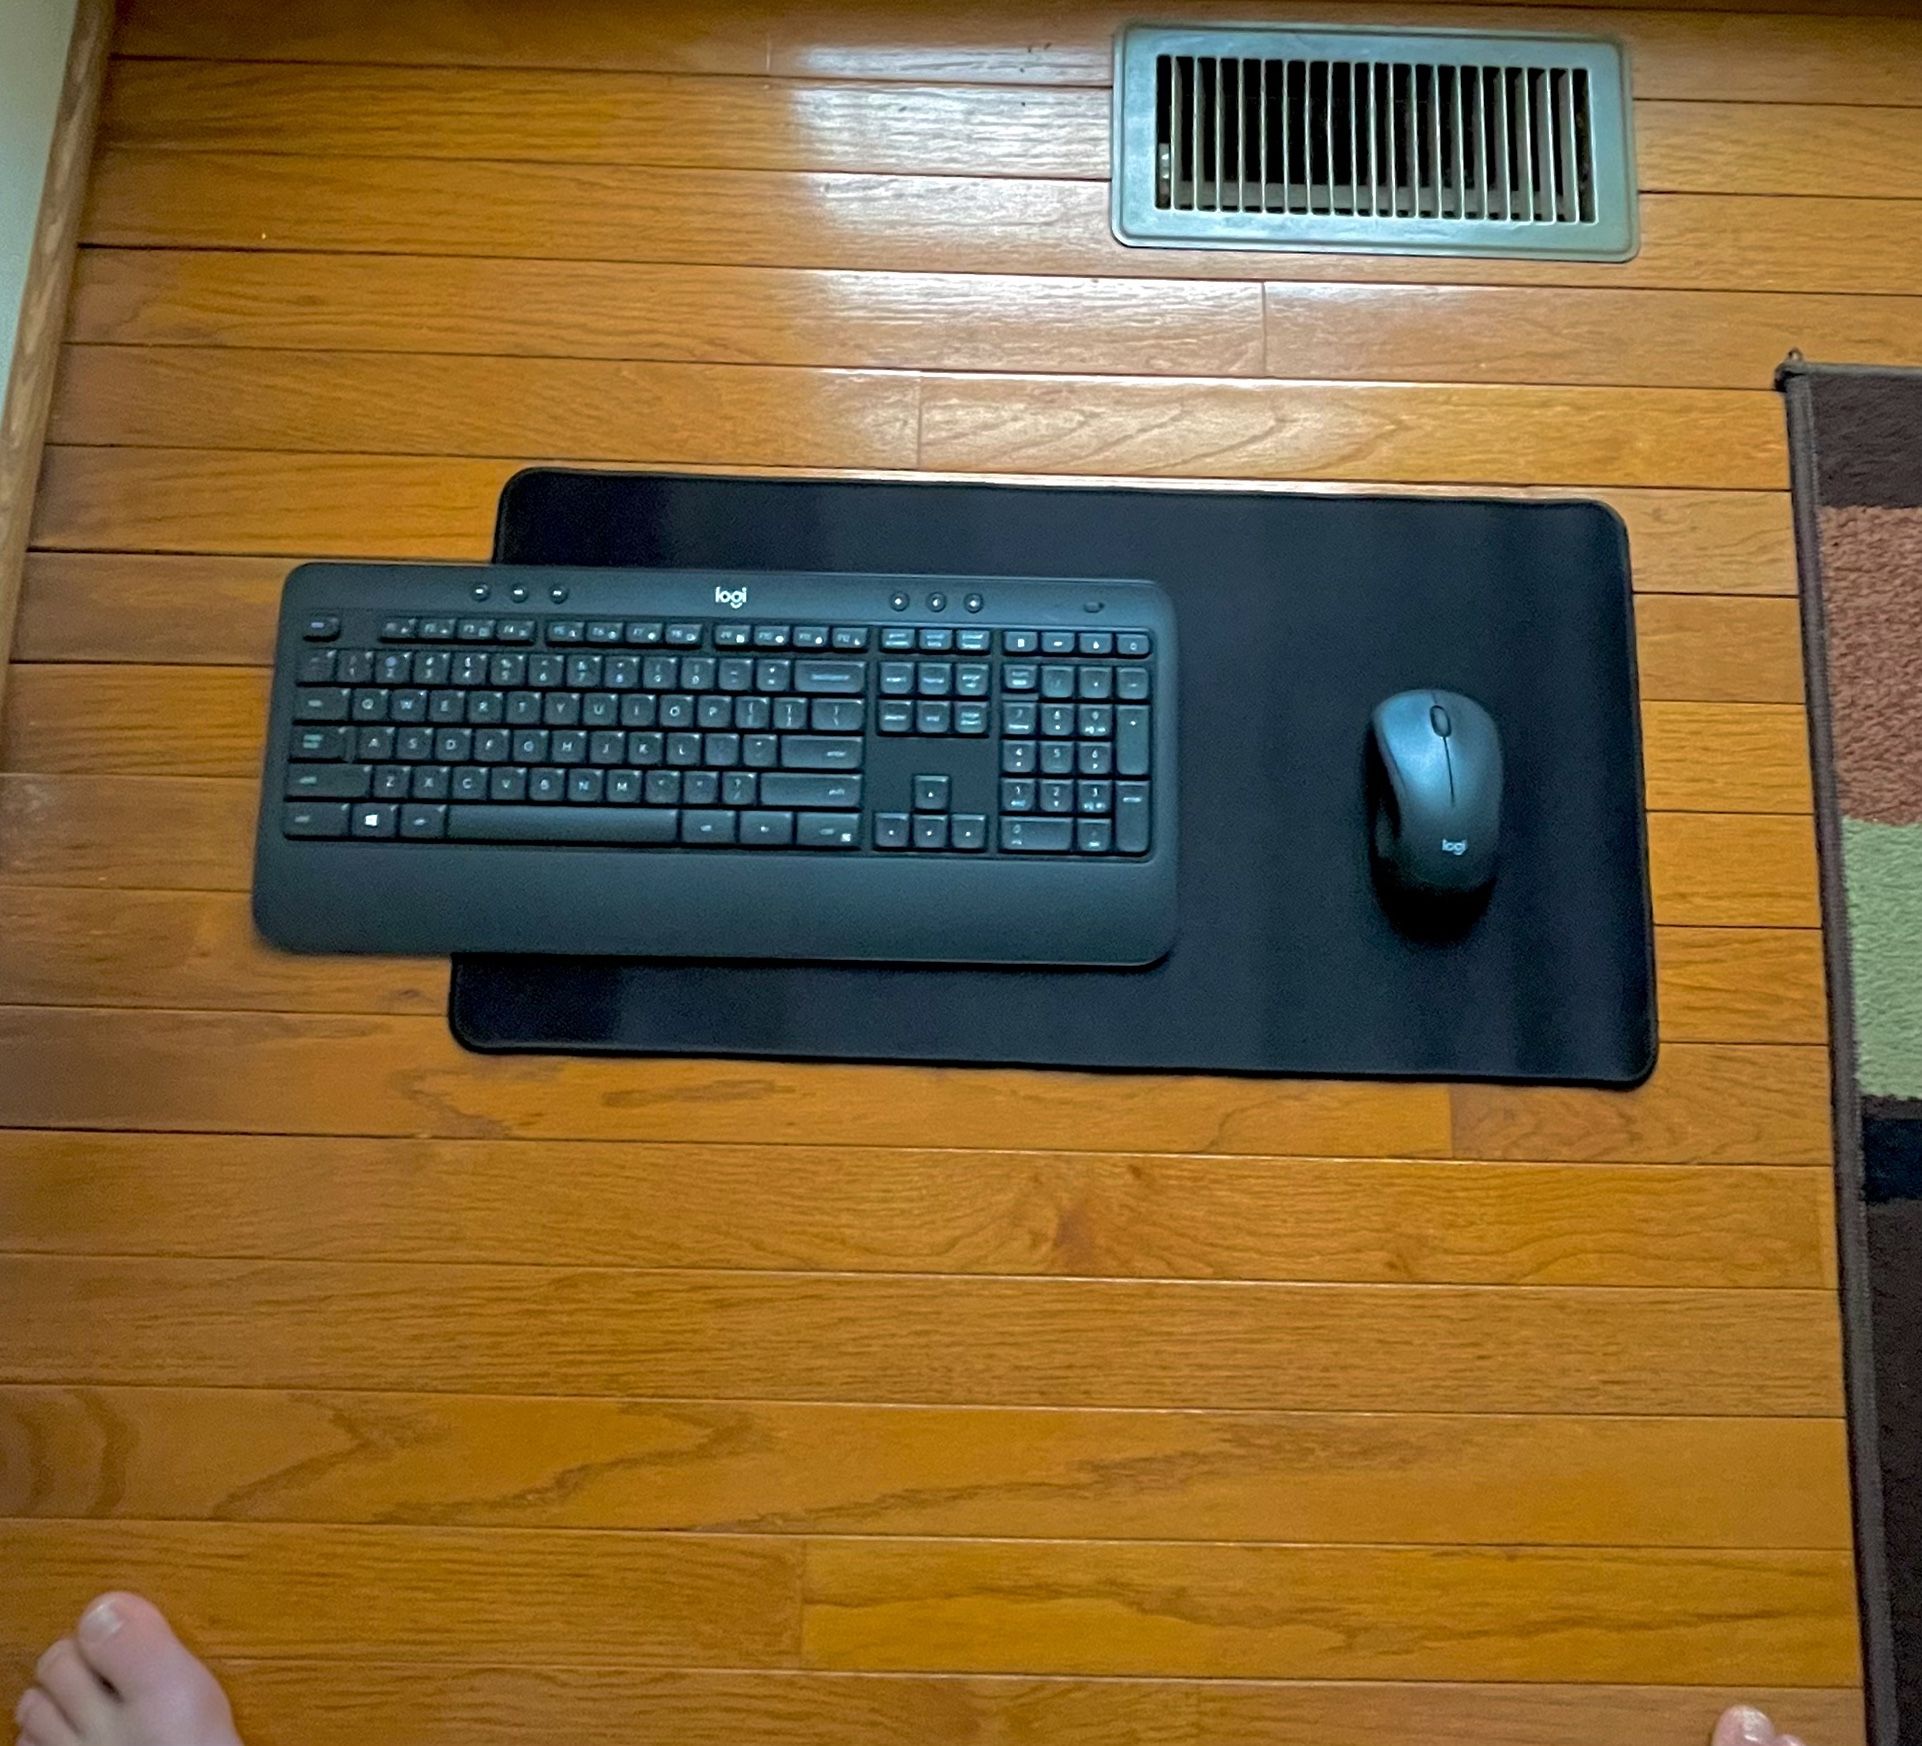 Mechanical Wireless Lenovo MK540 And Lenovo M310 Mouse That Plugs In With One Singular USB 